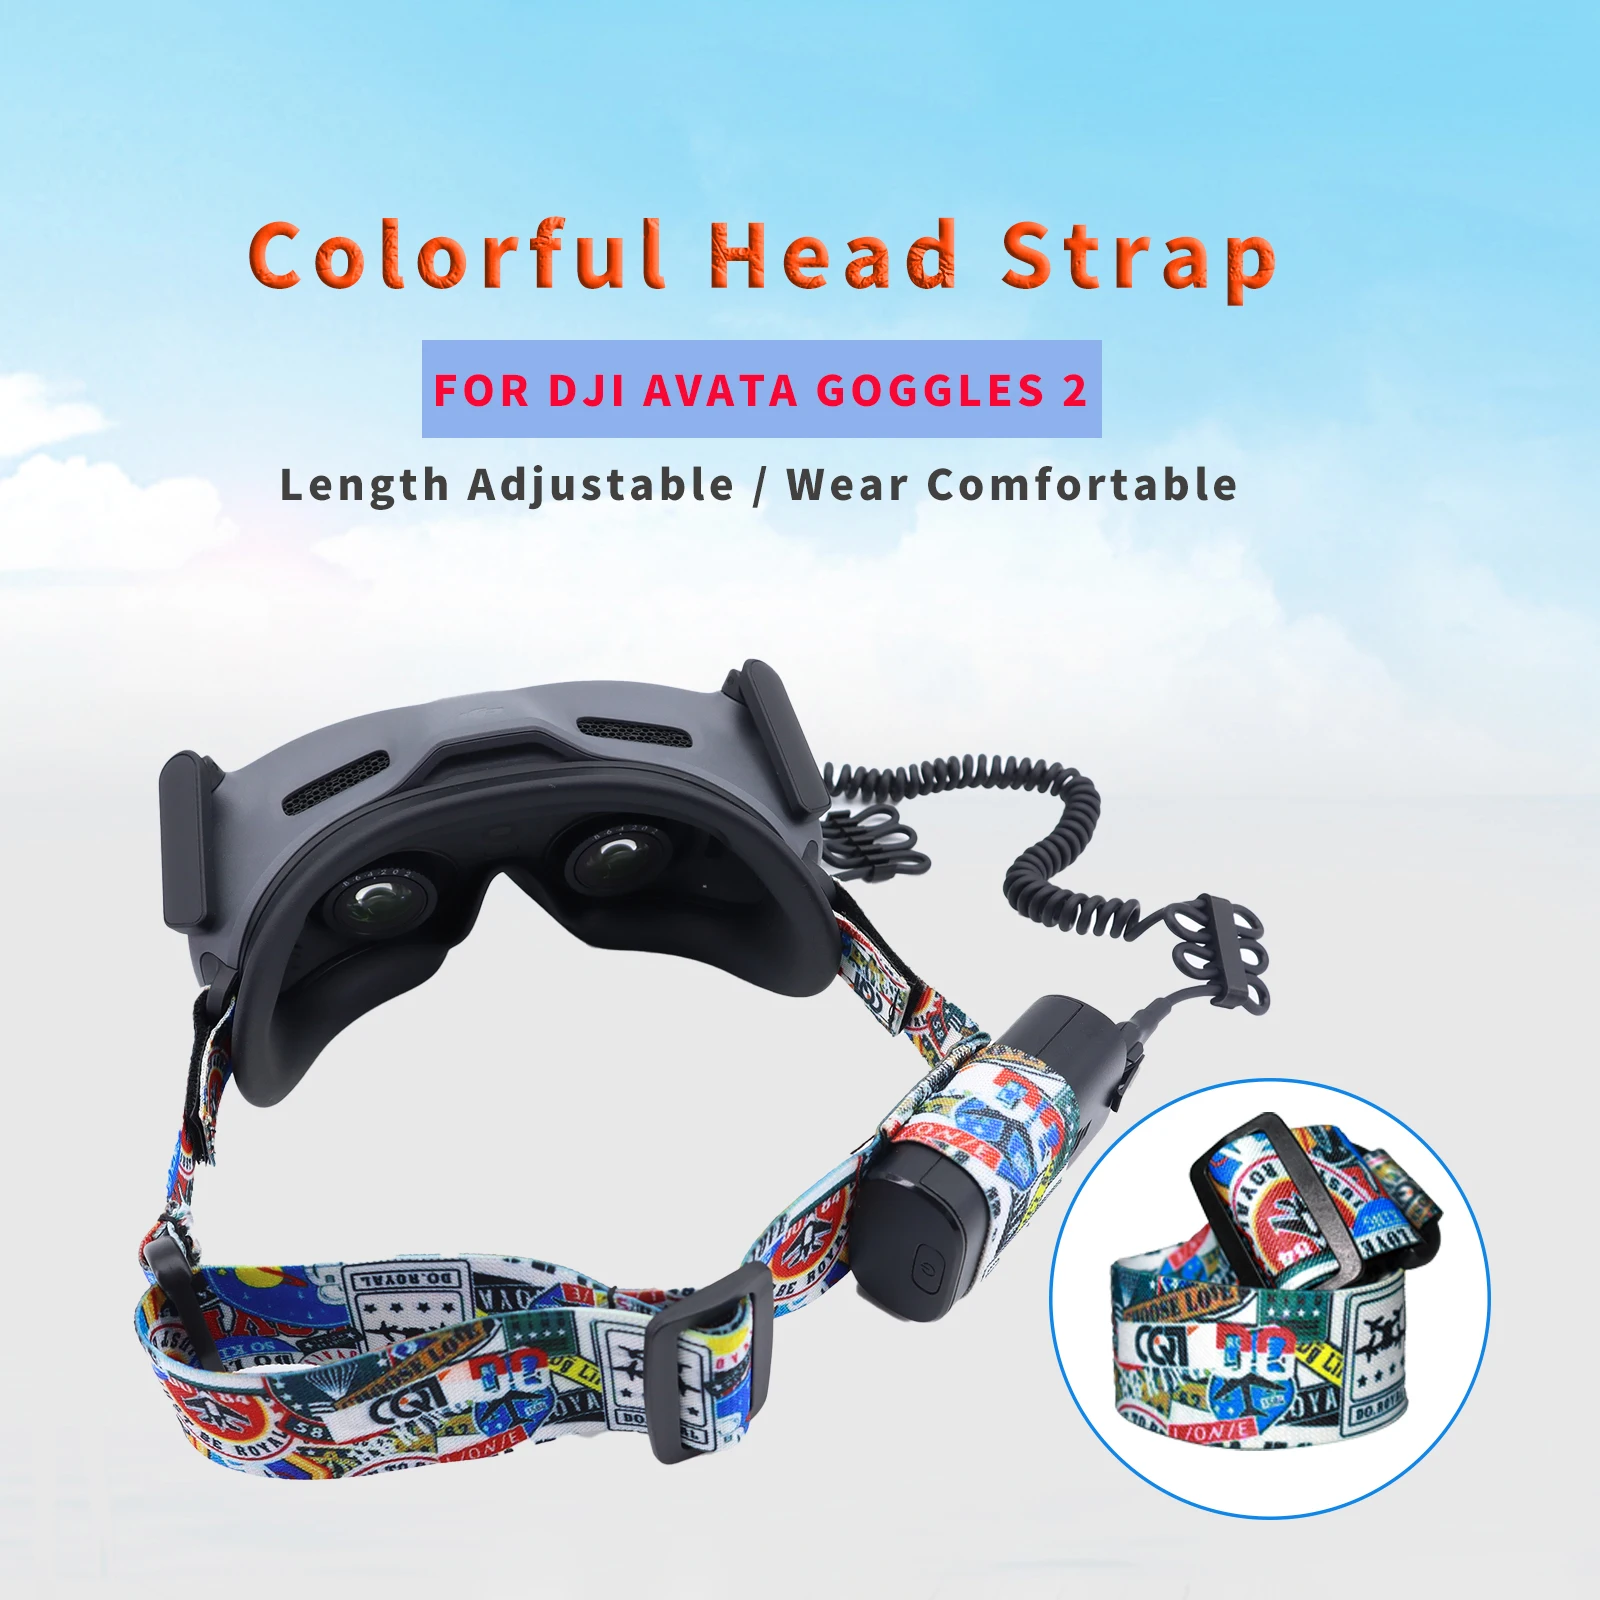 

For DJI Avata Goggles 2 Head Strap Flight Glasses Elastic Headband Color Headstrap Band Length Adjustable with Battery Fix Clamp